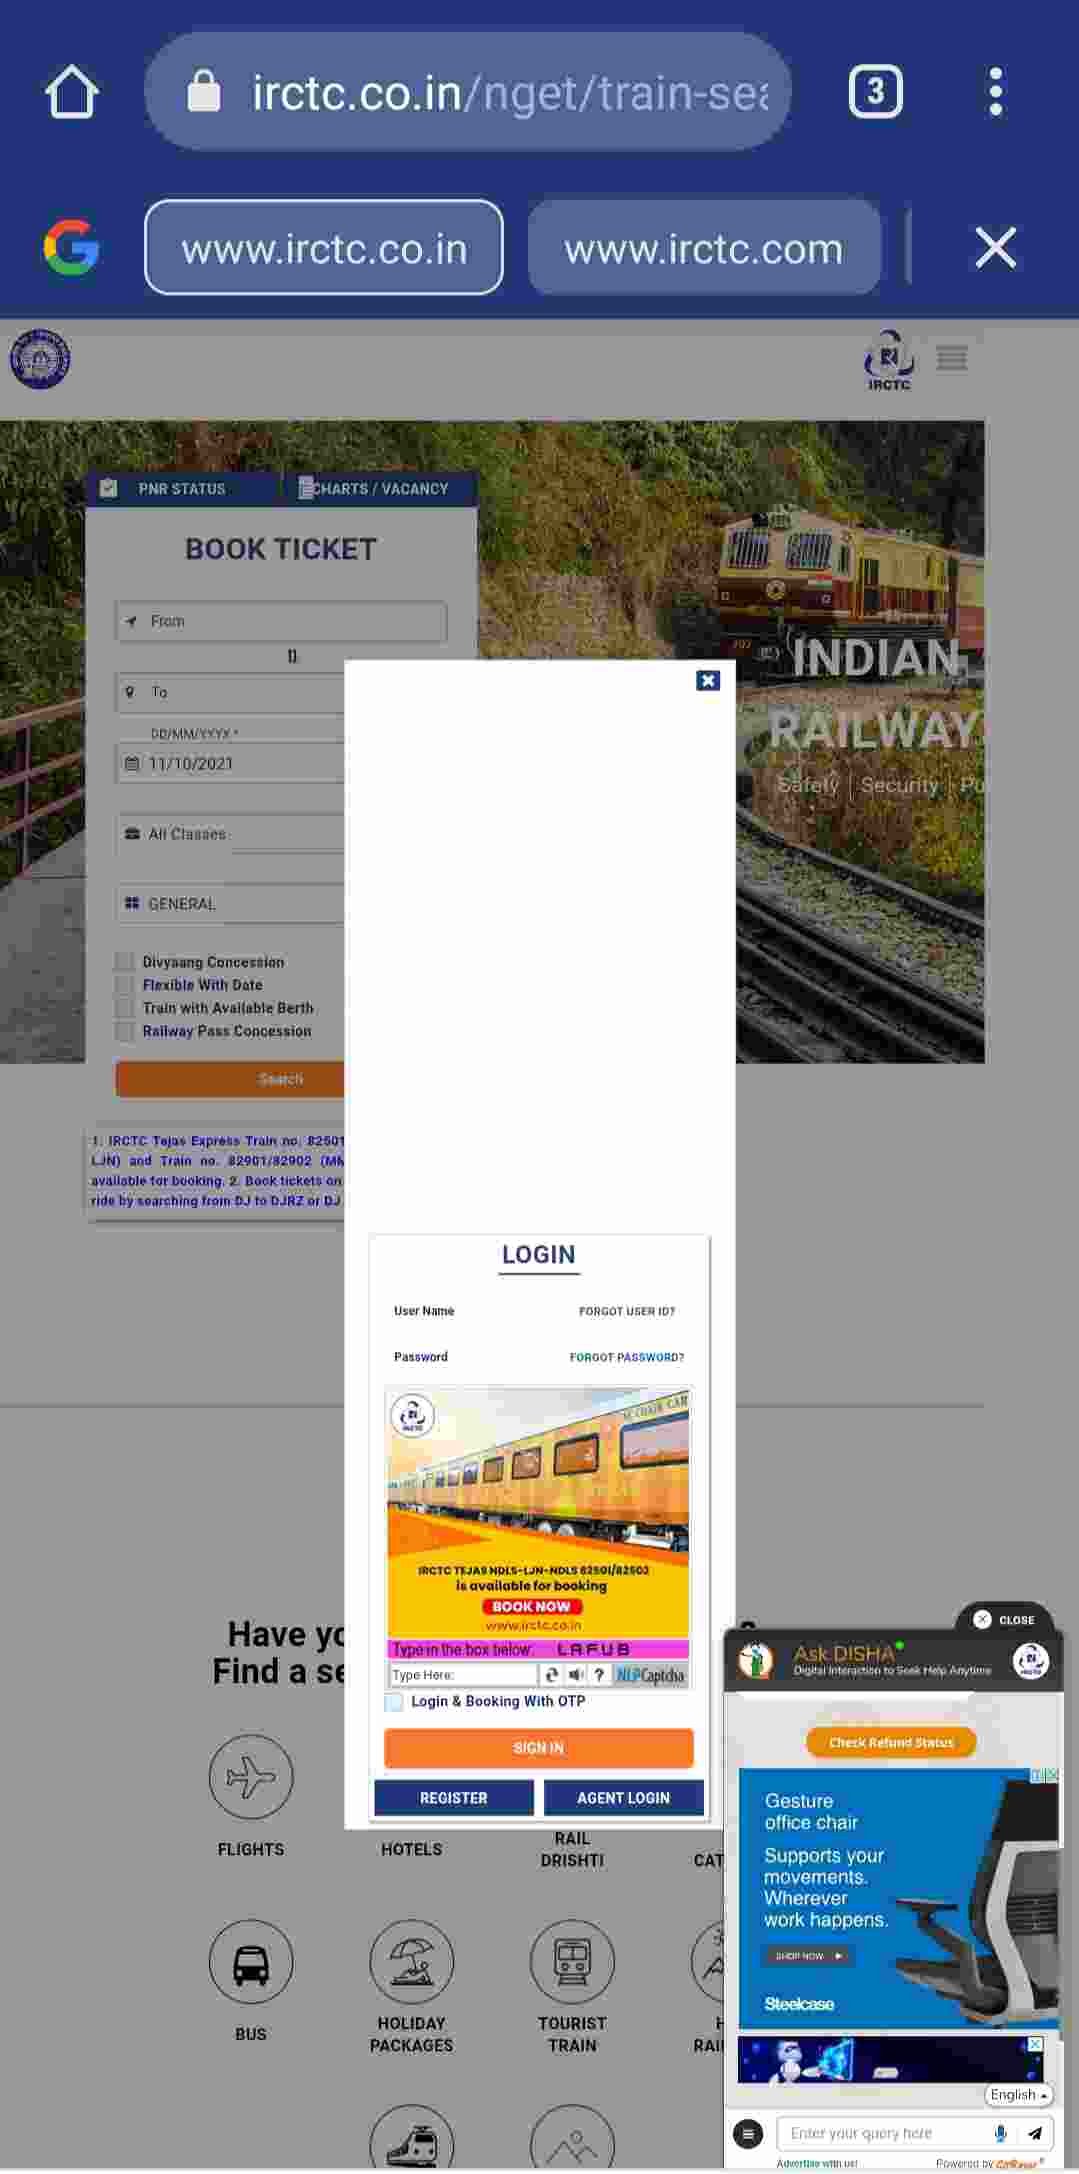 Visit IRCTC Official Website and Login